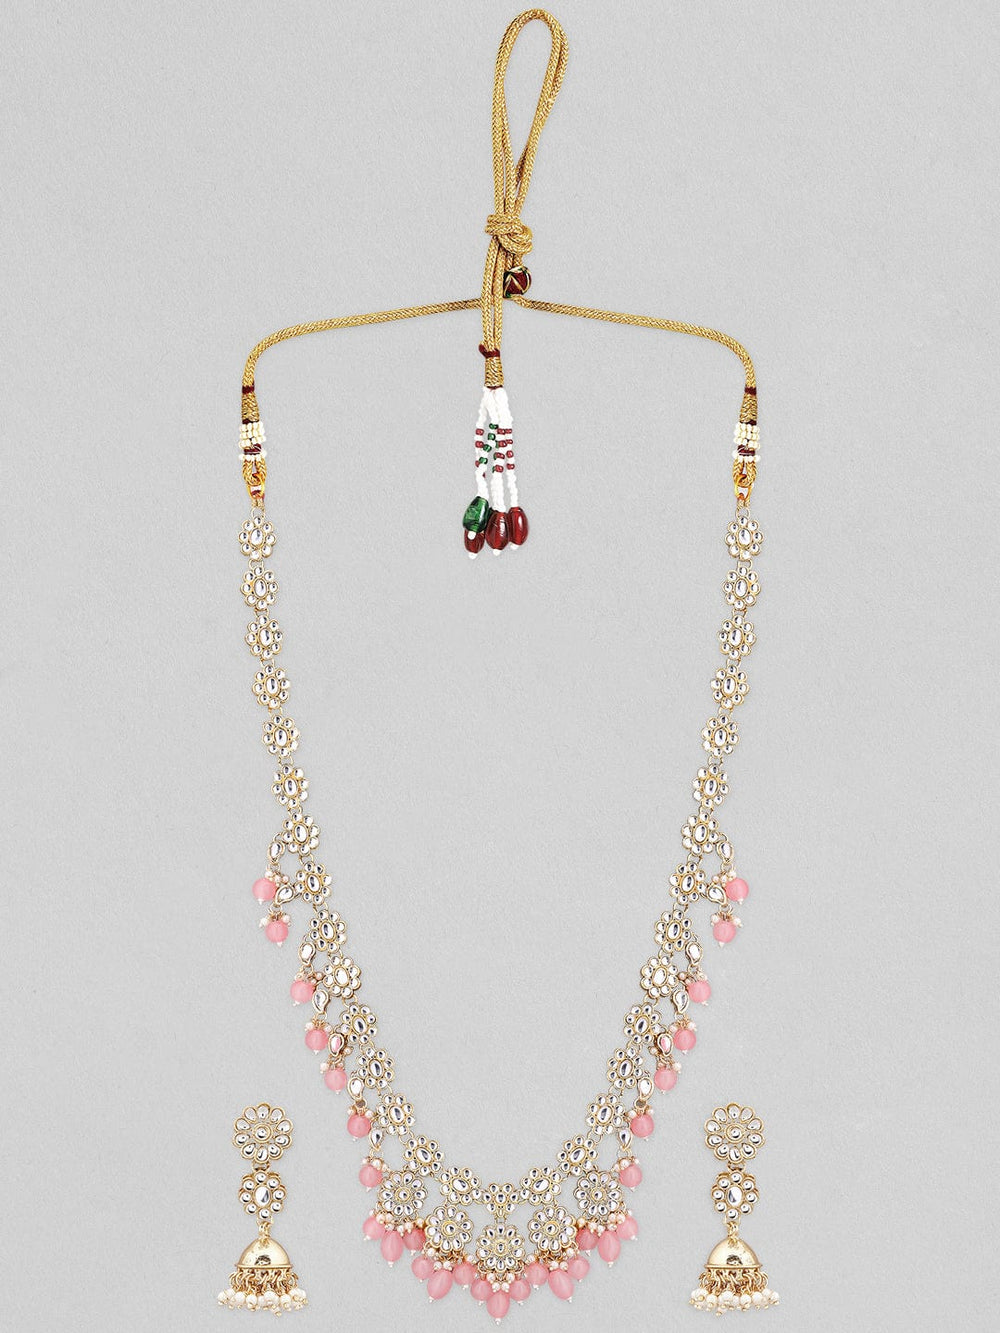 Rubans 22K Gold Plated Necklace Set With American Diamonds And Pink Stones. Necklace Set